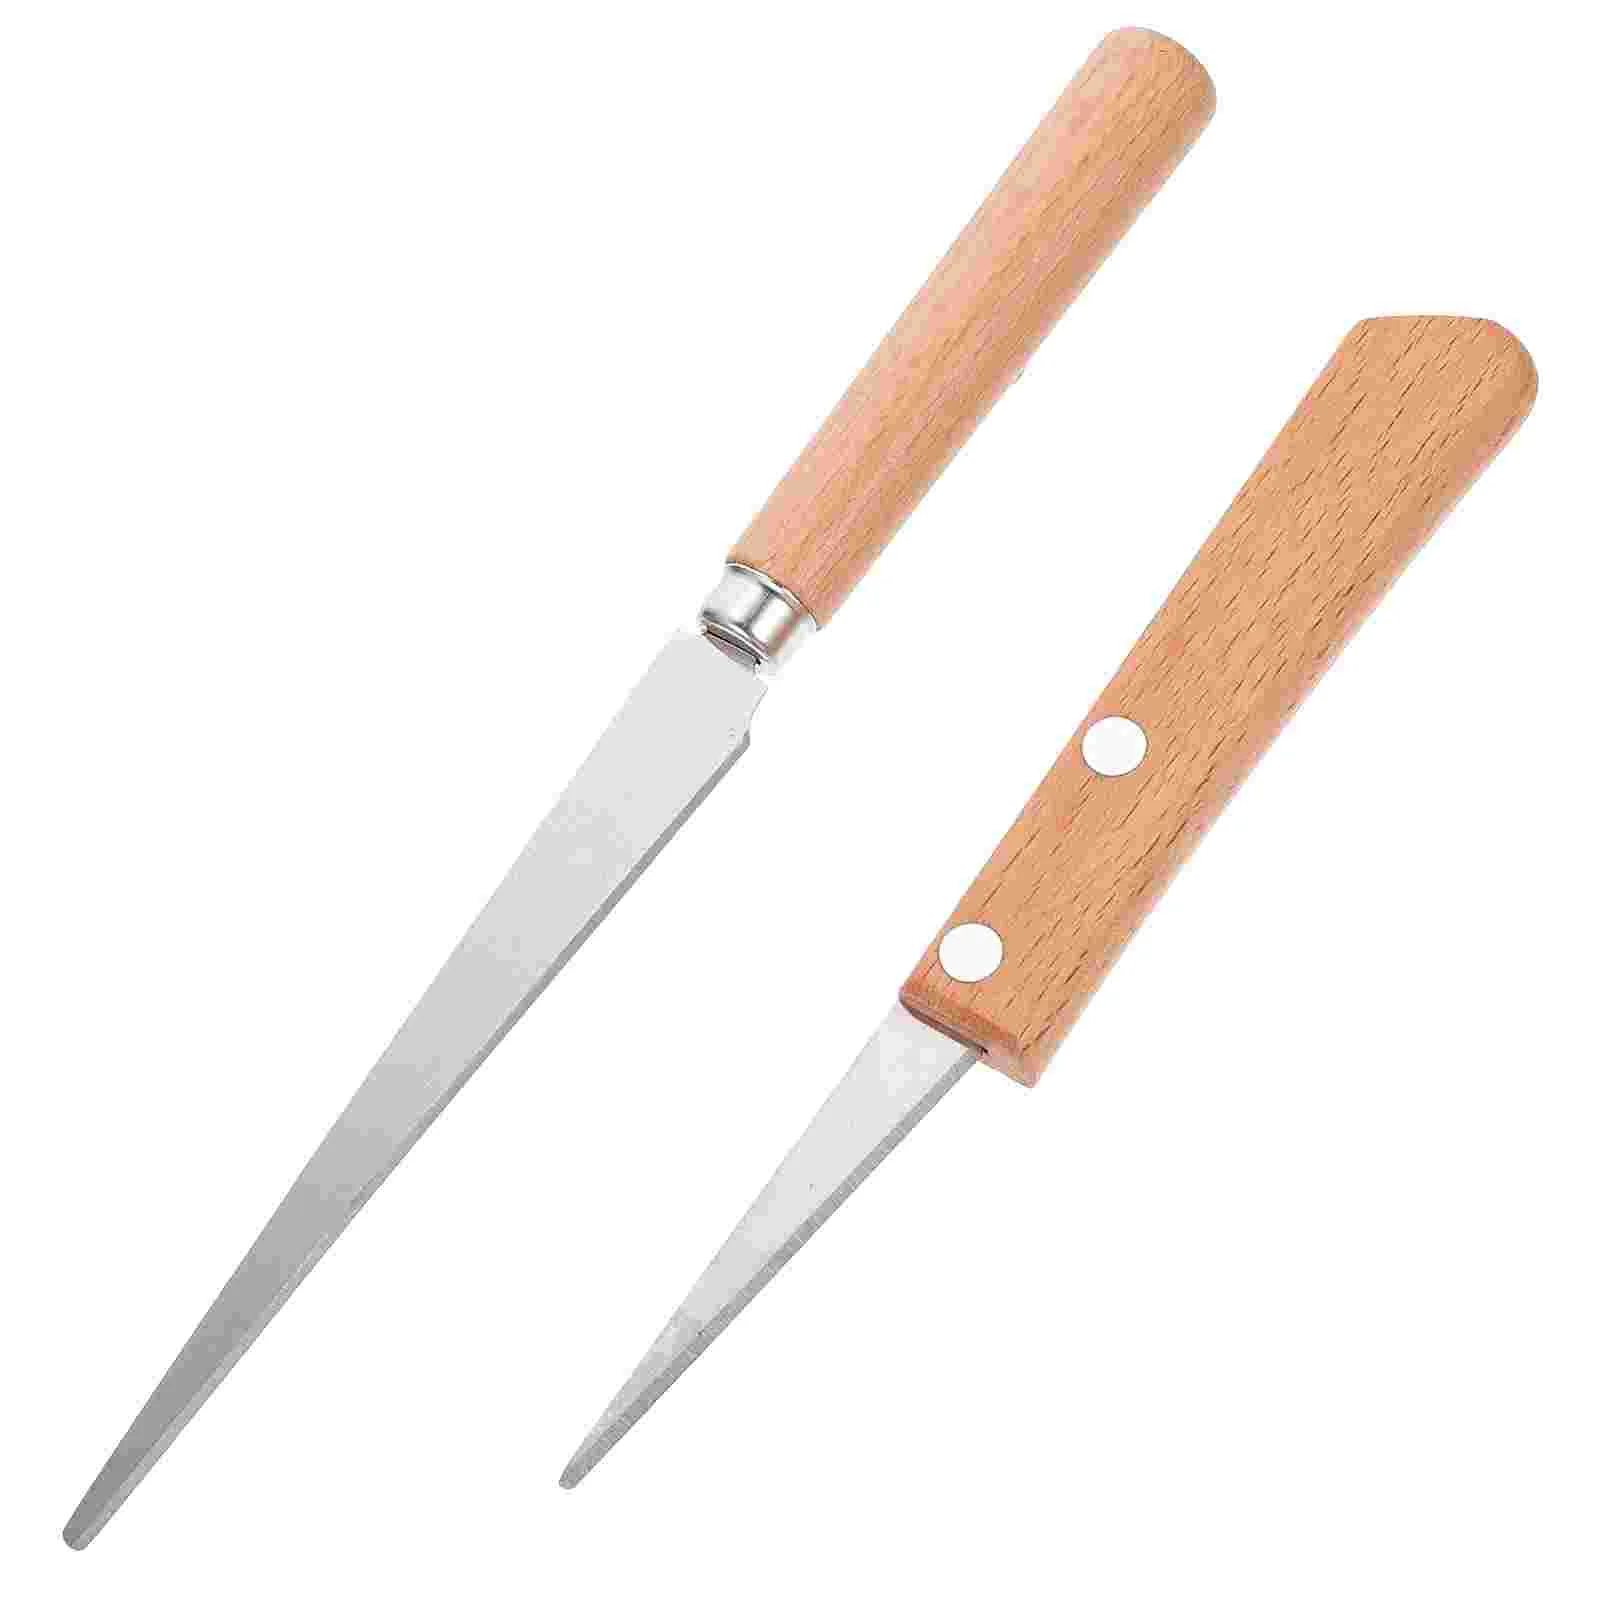 

2 Pieces Ceramic Fettling Claeys Fettling Pottery Garnish Tools Clay Repair Toolkit Wood Carving Tool